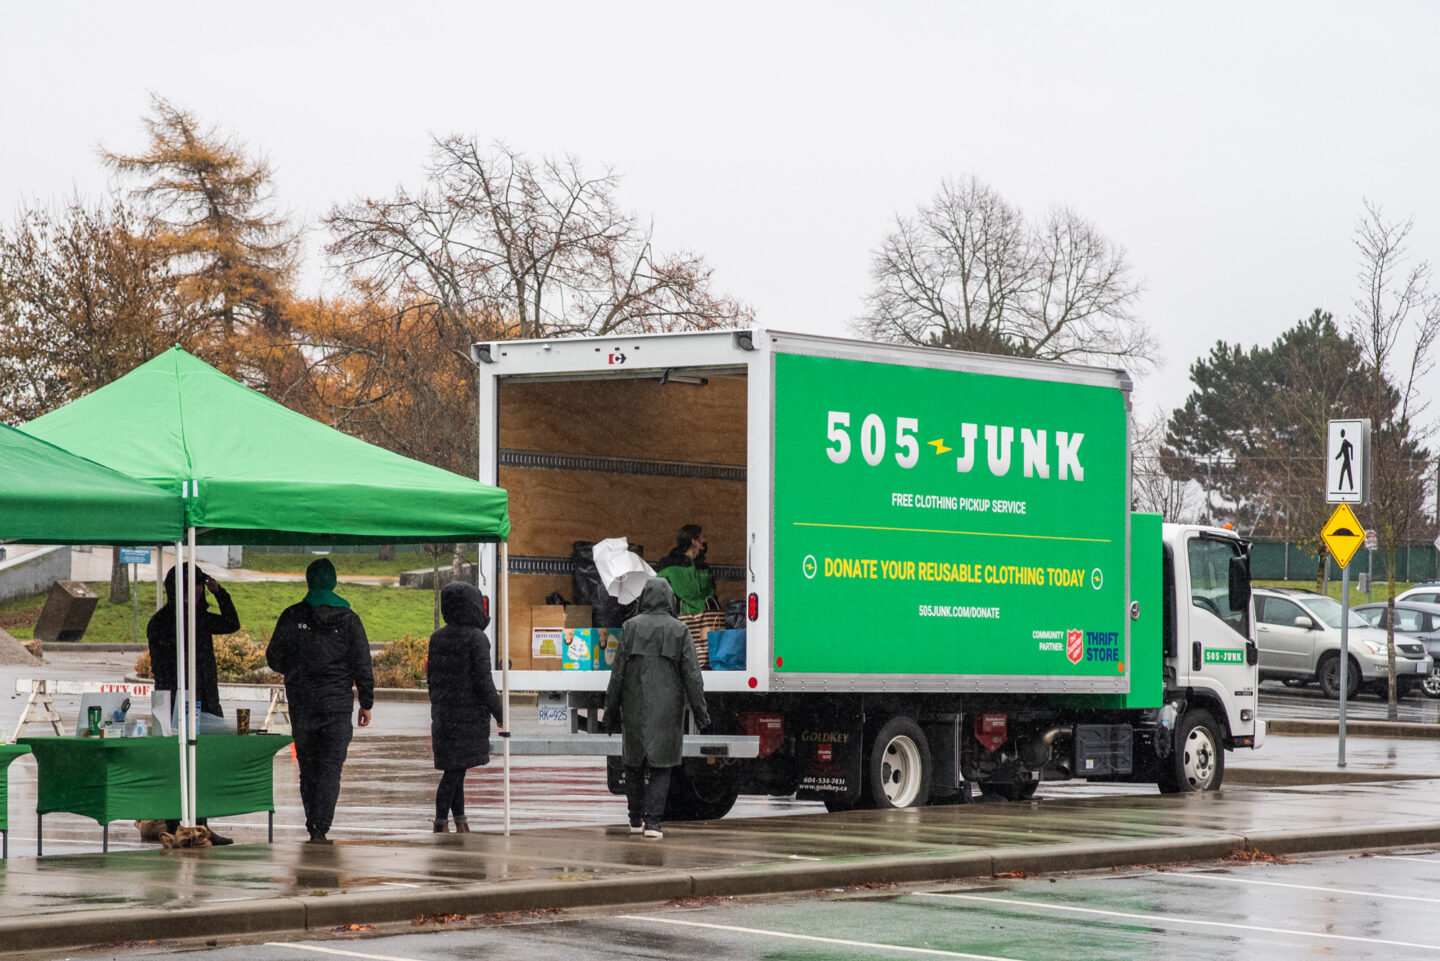 505-Junk donation van collecting clothing during a clothing drive with our junk removal team. 